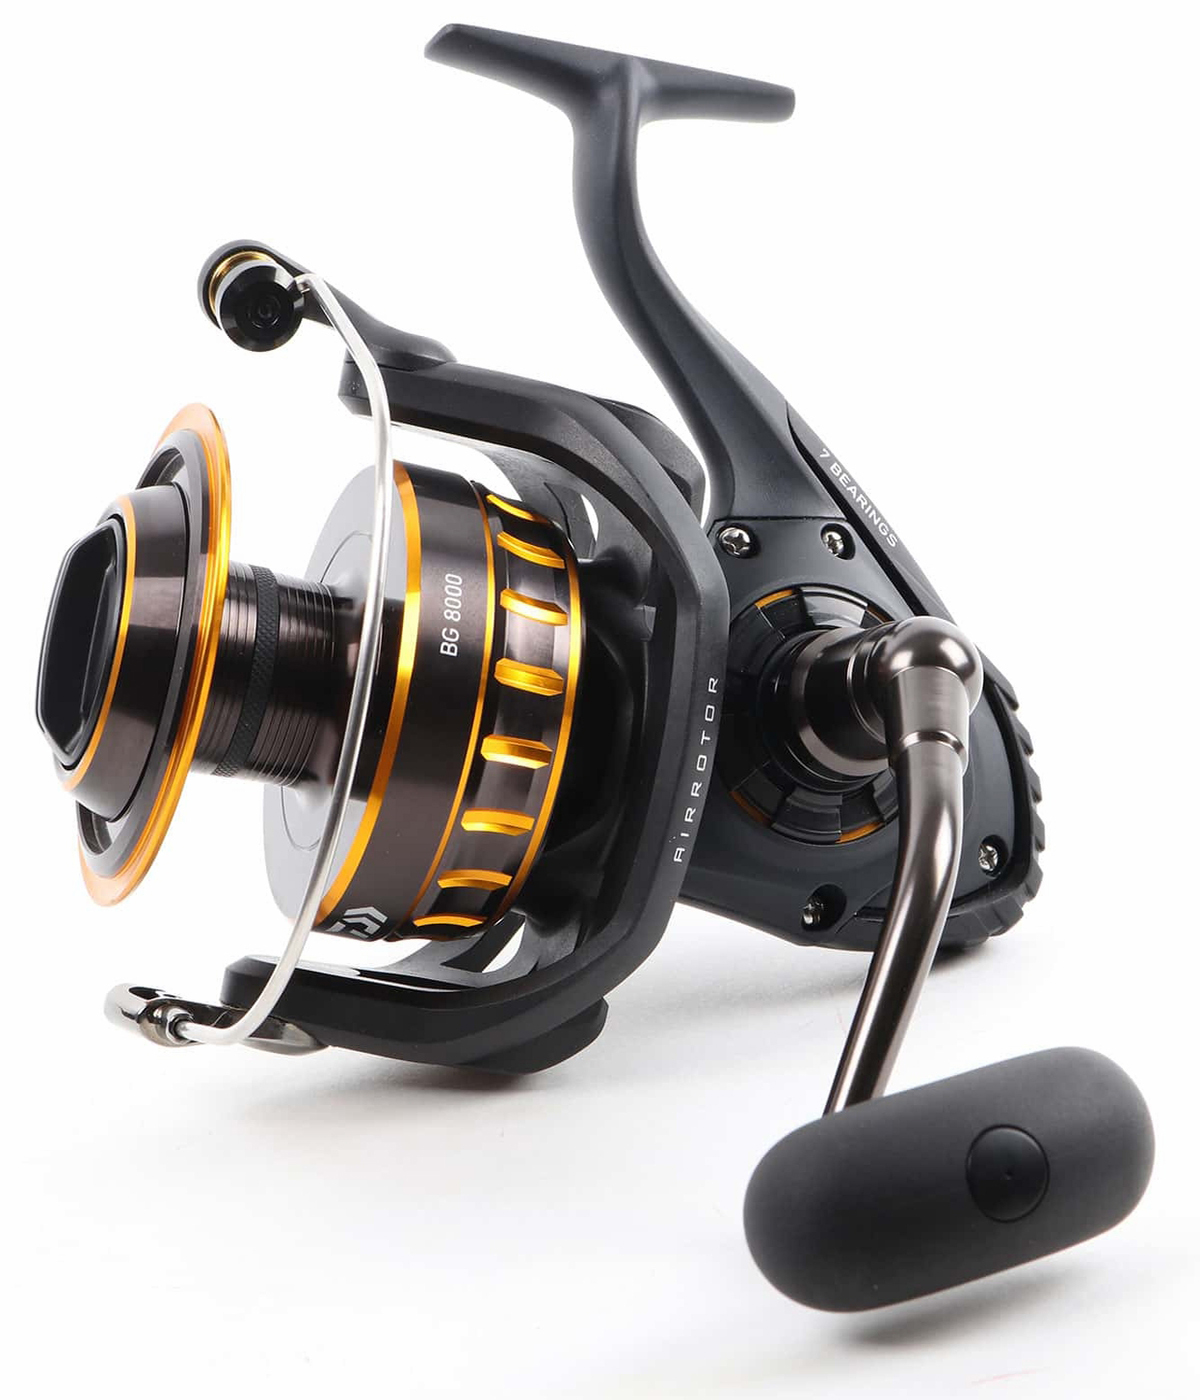 Saltwater Baitcasting Reel Collection - TackleDirect